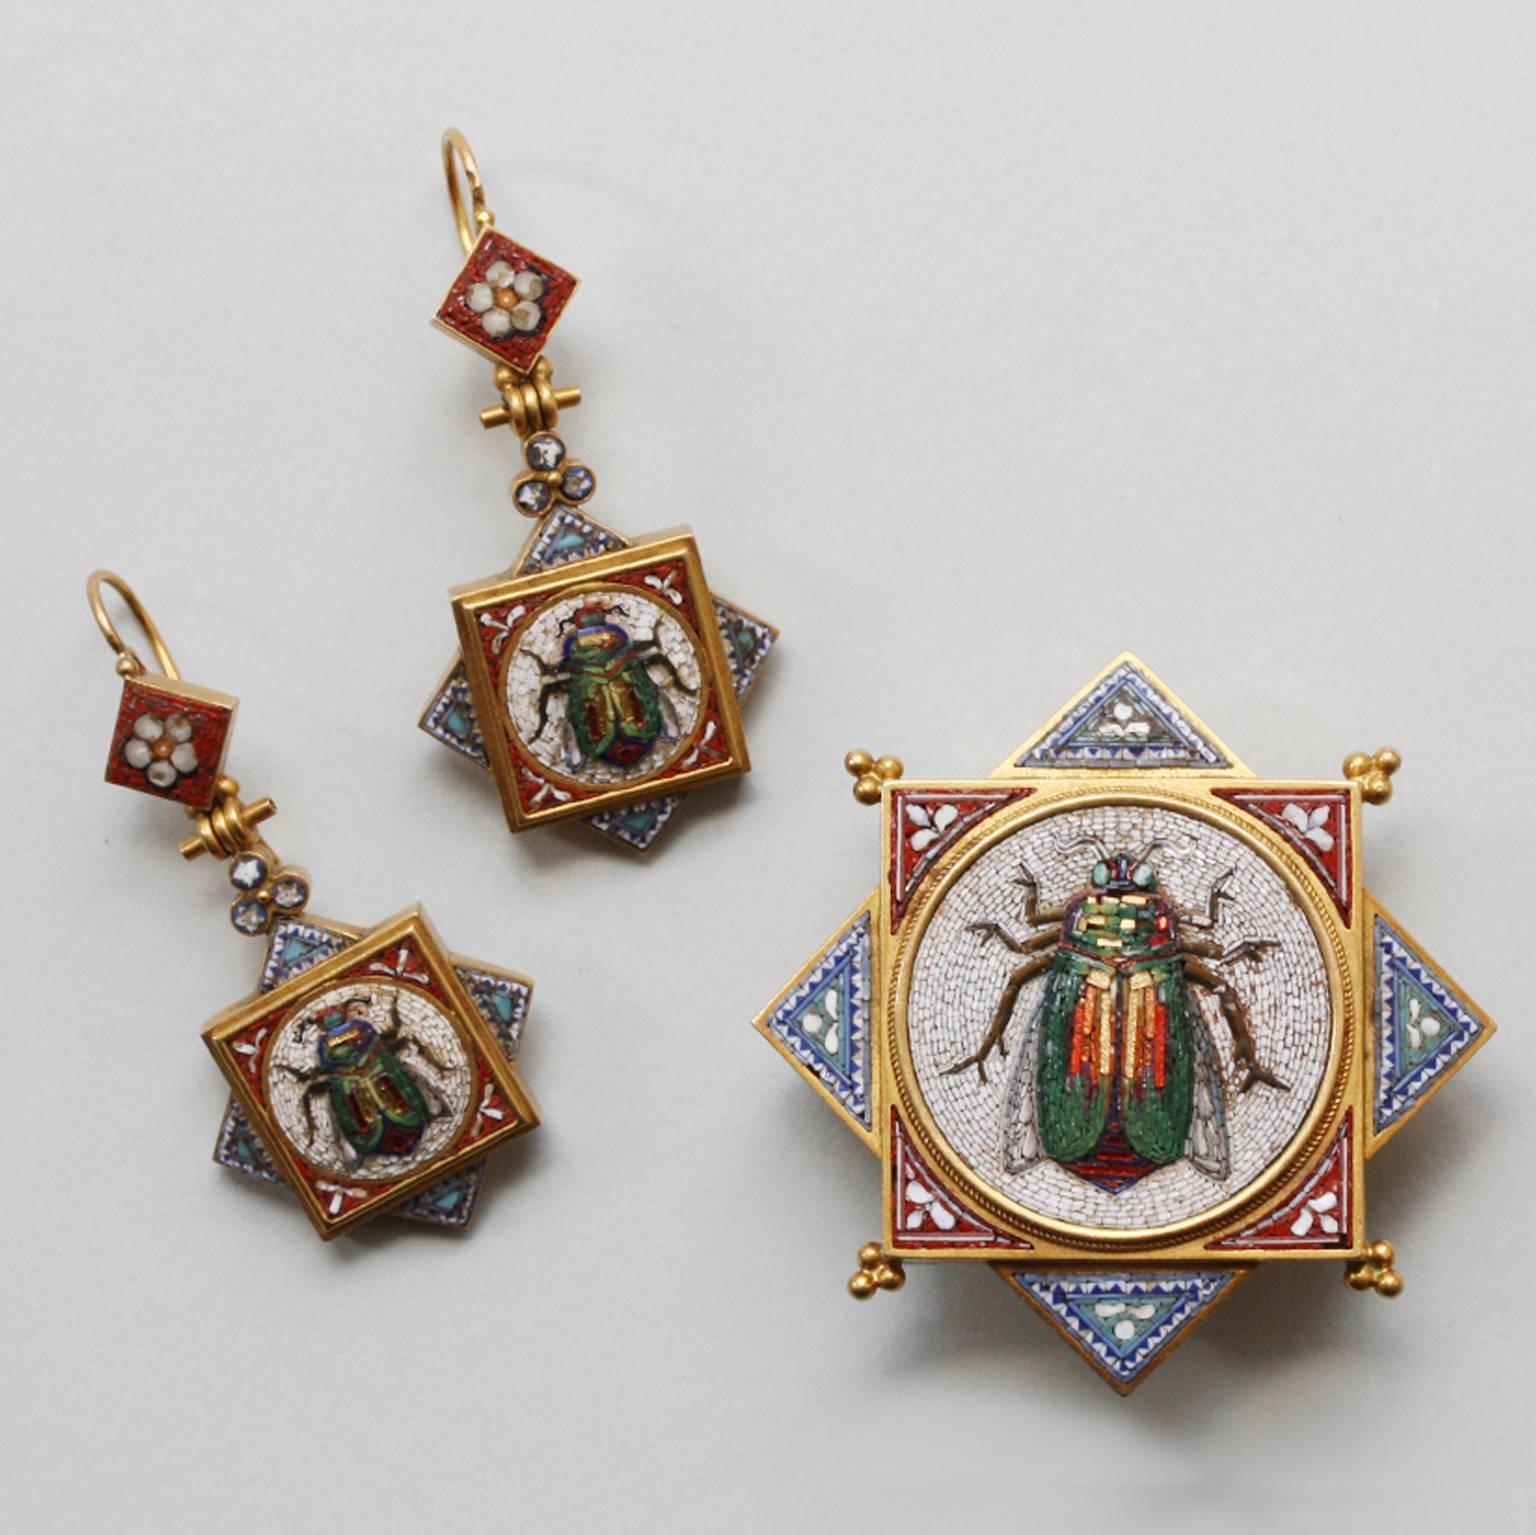 An 18 carat gold micromosaic Egyptian Revival suite consisting of a brooch and a pair of earrings, the micromosaics are decorated with beetles with little gold accented 'tesserae' the gold has applied wirework and beads and Papal marks for Italy